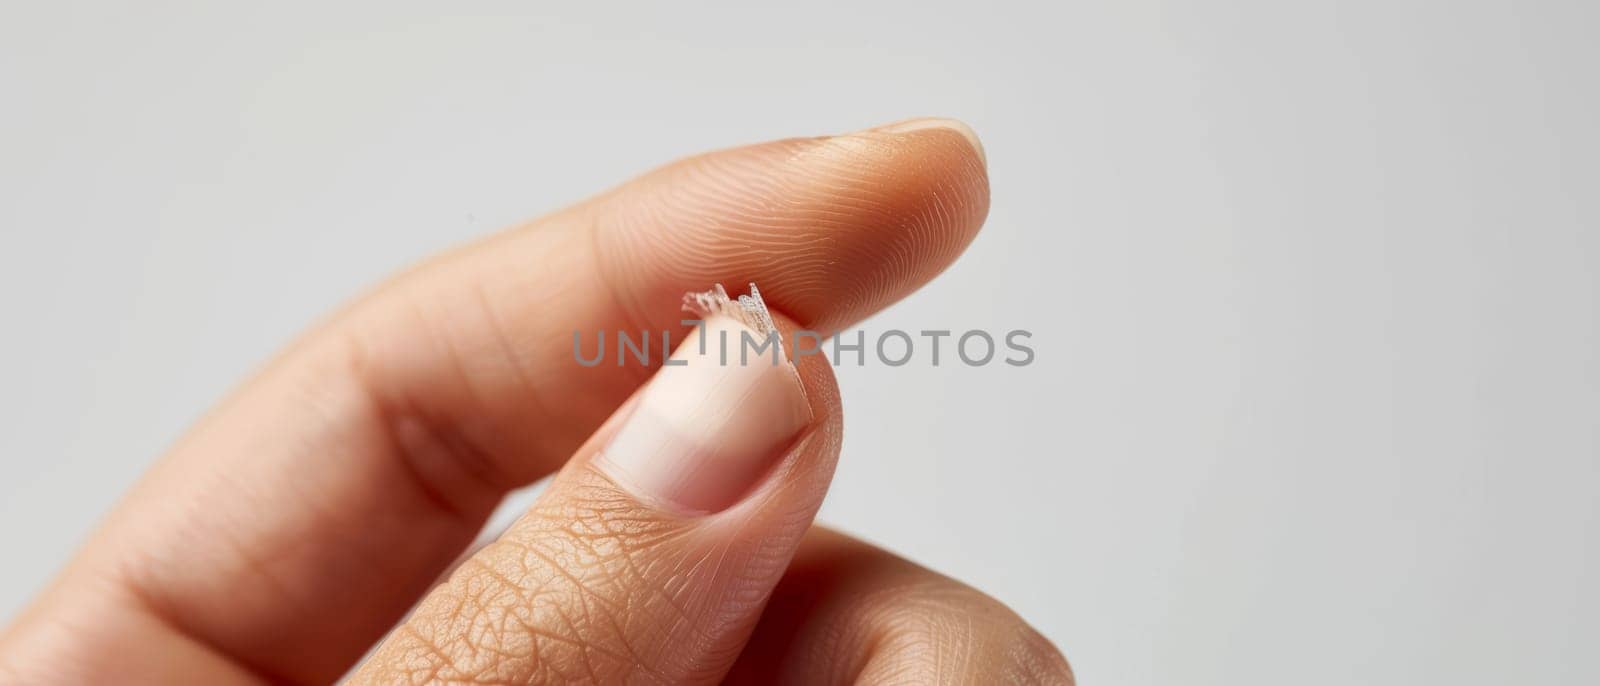 An extreme close-up of a completely shattered and splintered fingernail, conveying a sense of pain and the body's fragility